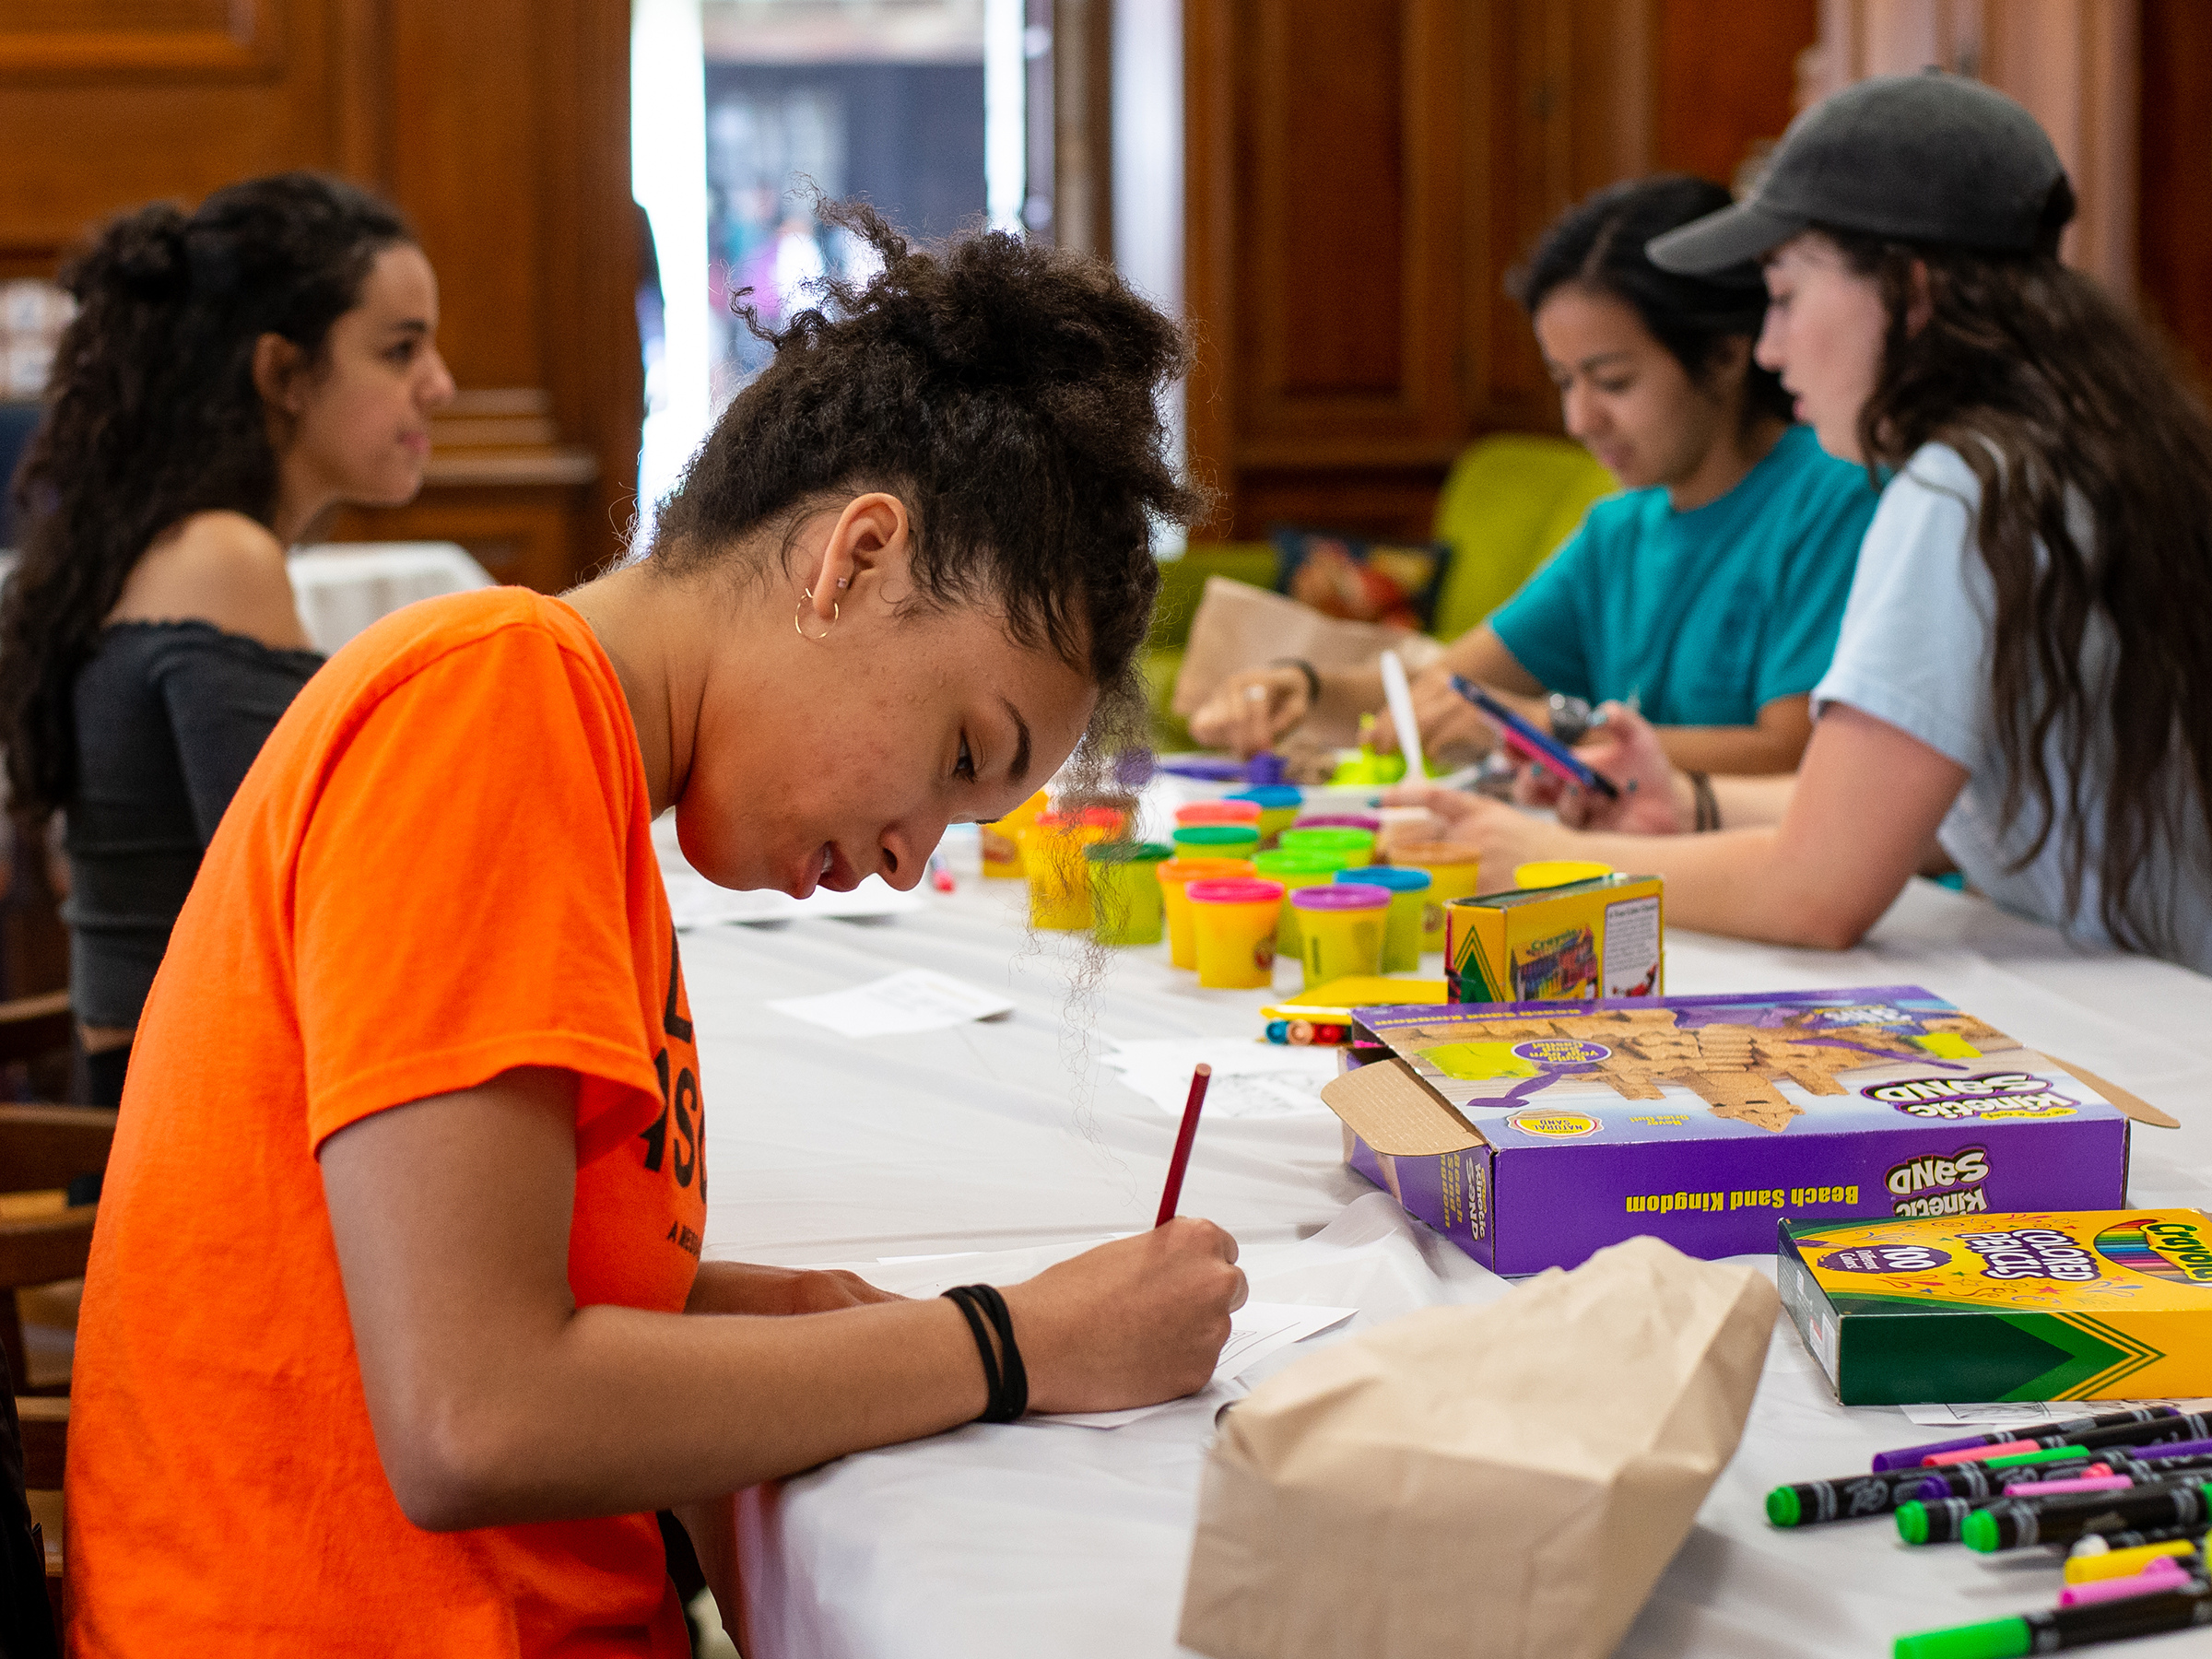 Students at a table socializing and engaging in arts and crafts activites as part of a "destress" space offered by the college.